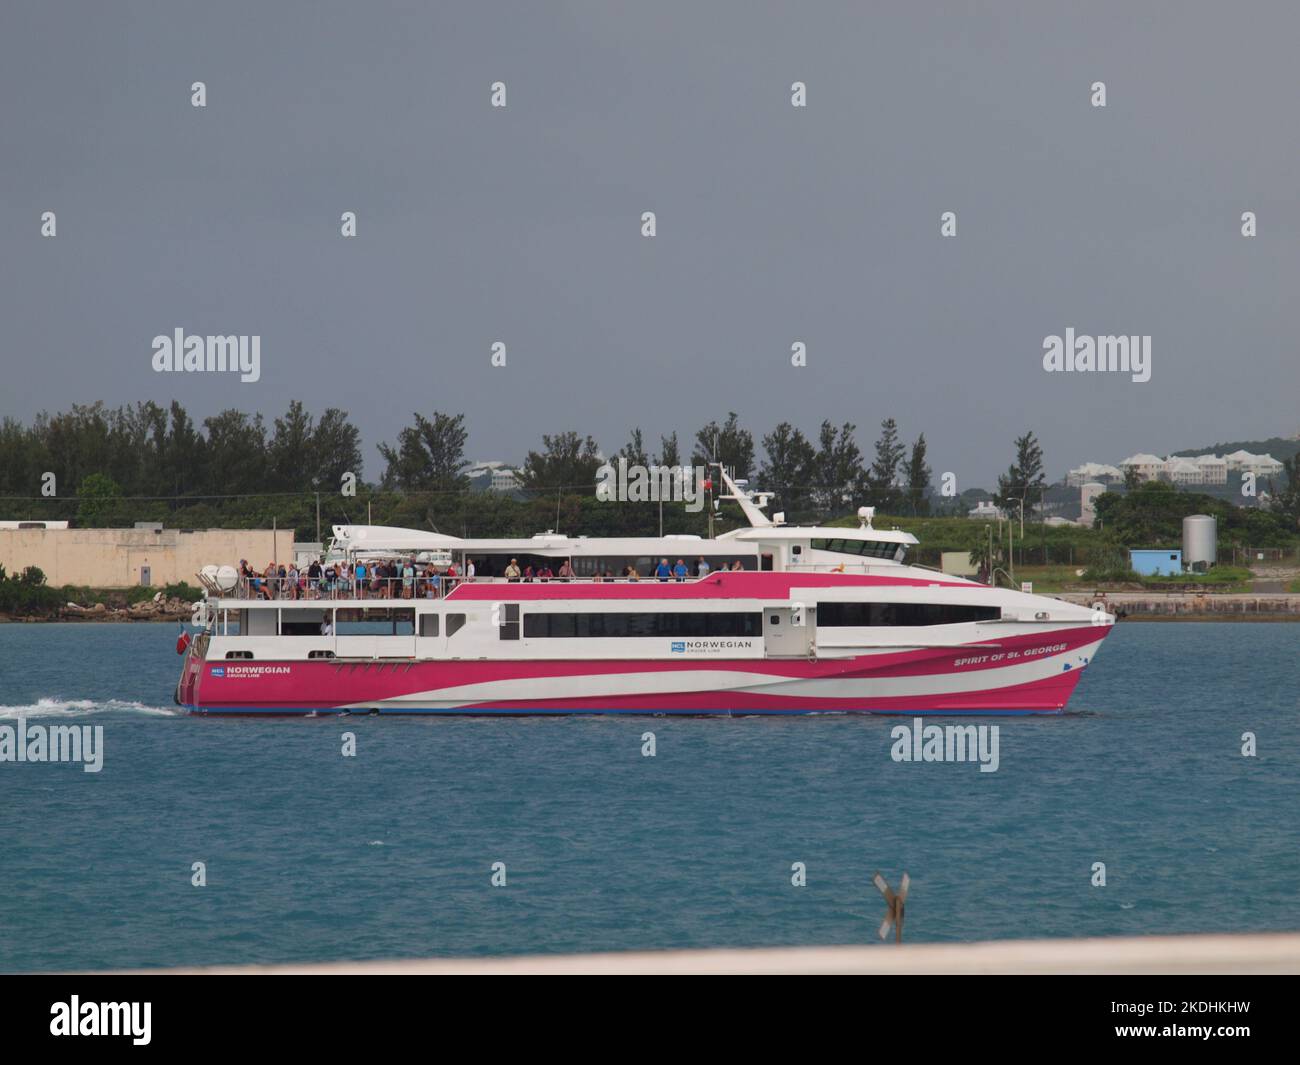 Large ferry entering St. George's harbor in Bermuda. This ferry is provided by the Norwegian Cruise Line for passenger connivence. Stock Photo